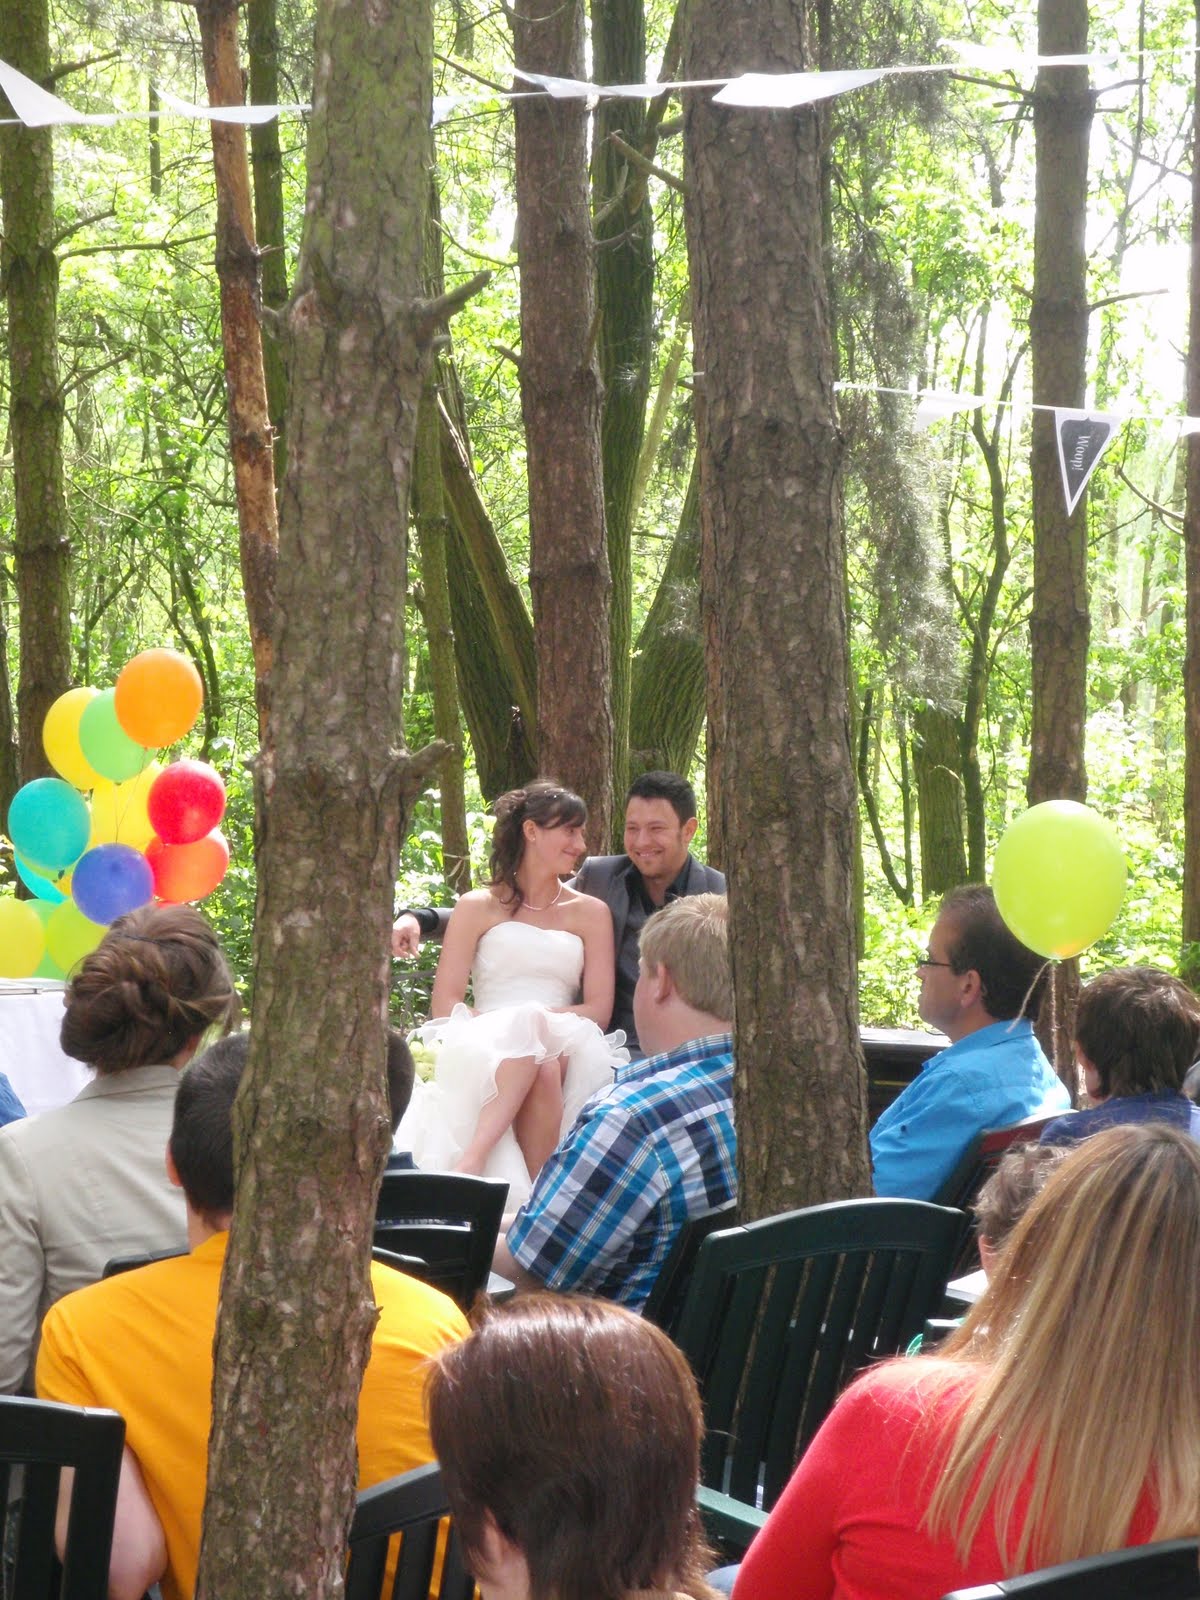 UNIQUE - The wedding ceremony in the middle of the forest